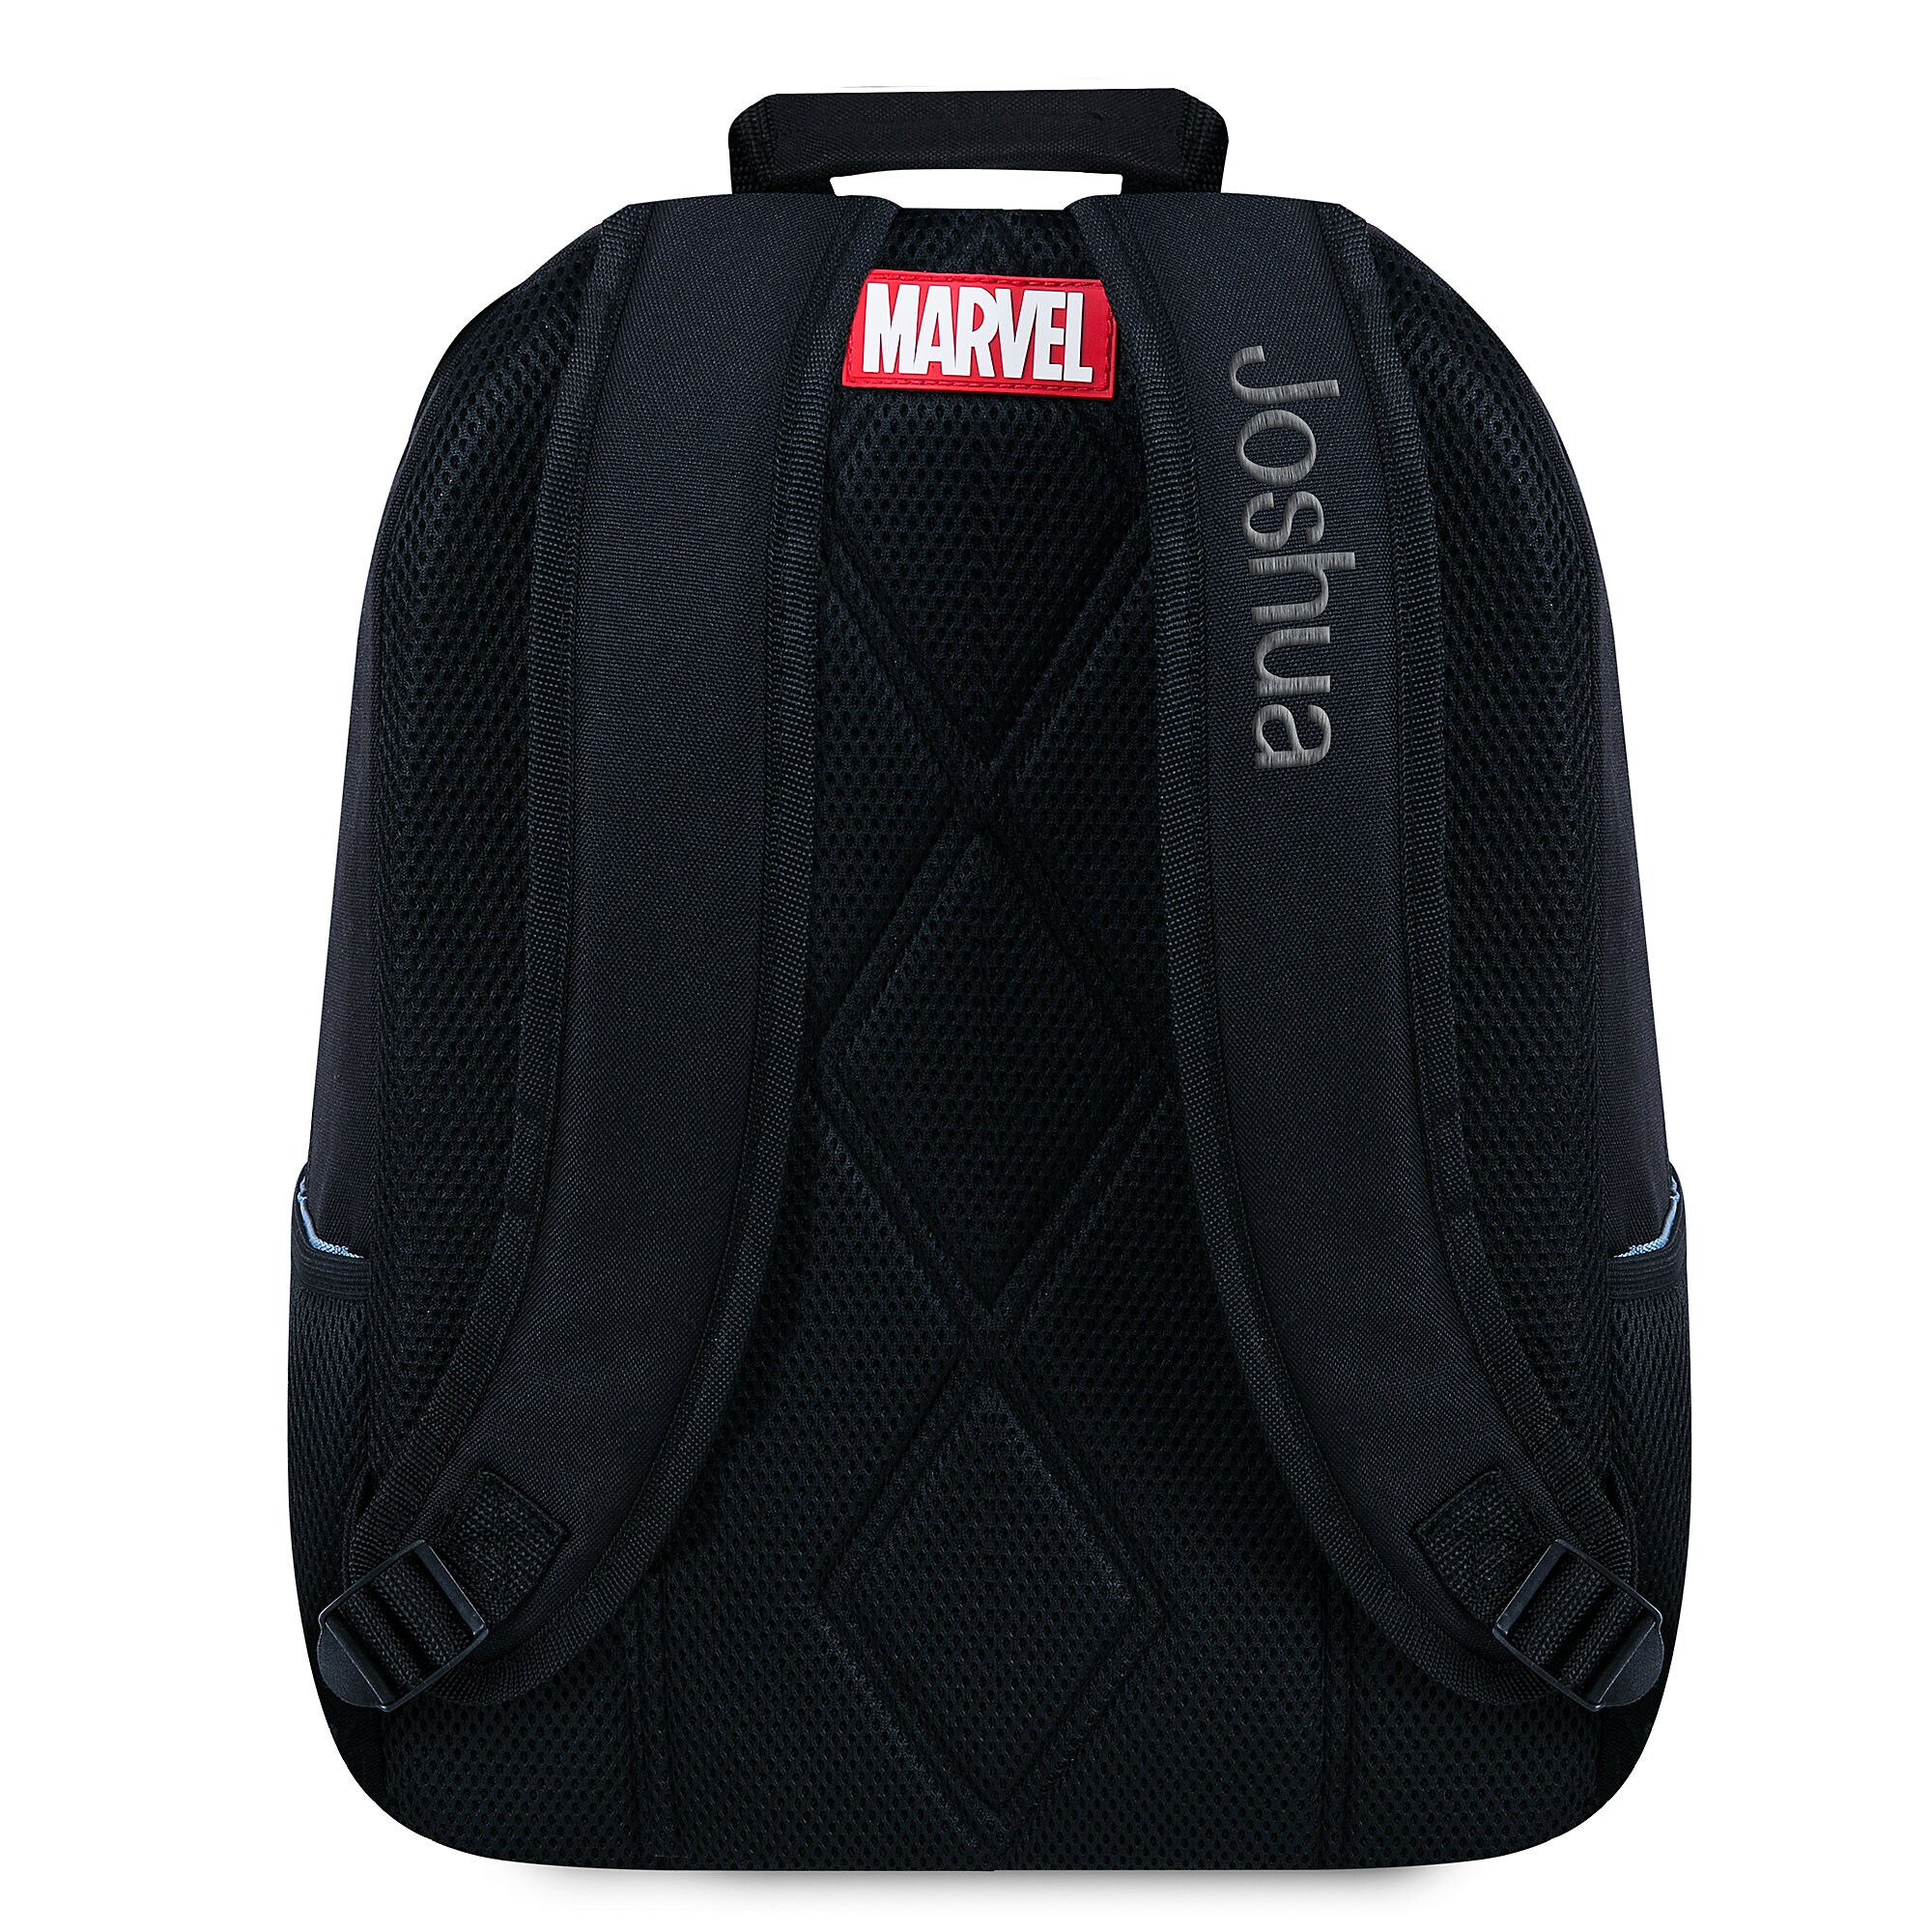 Black Panther Backpack - Personalized